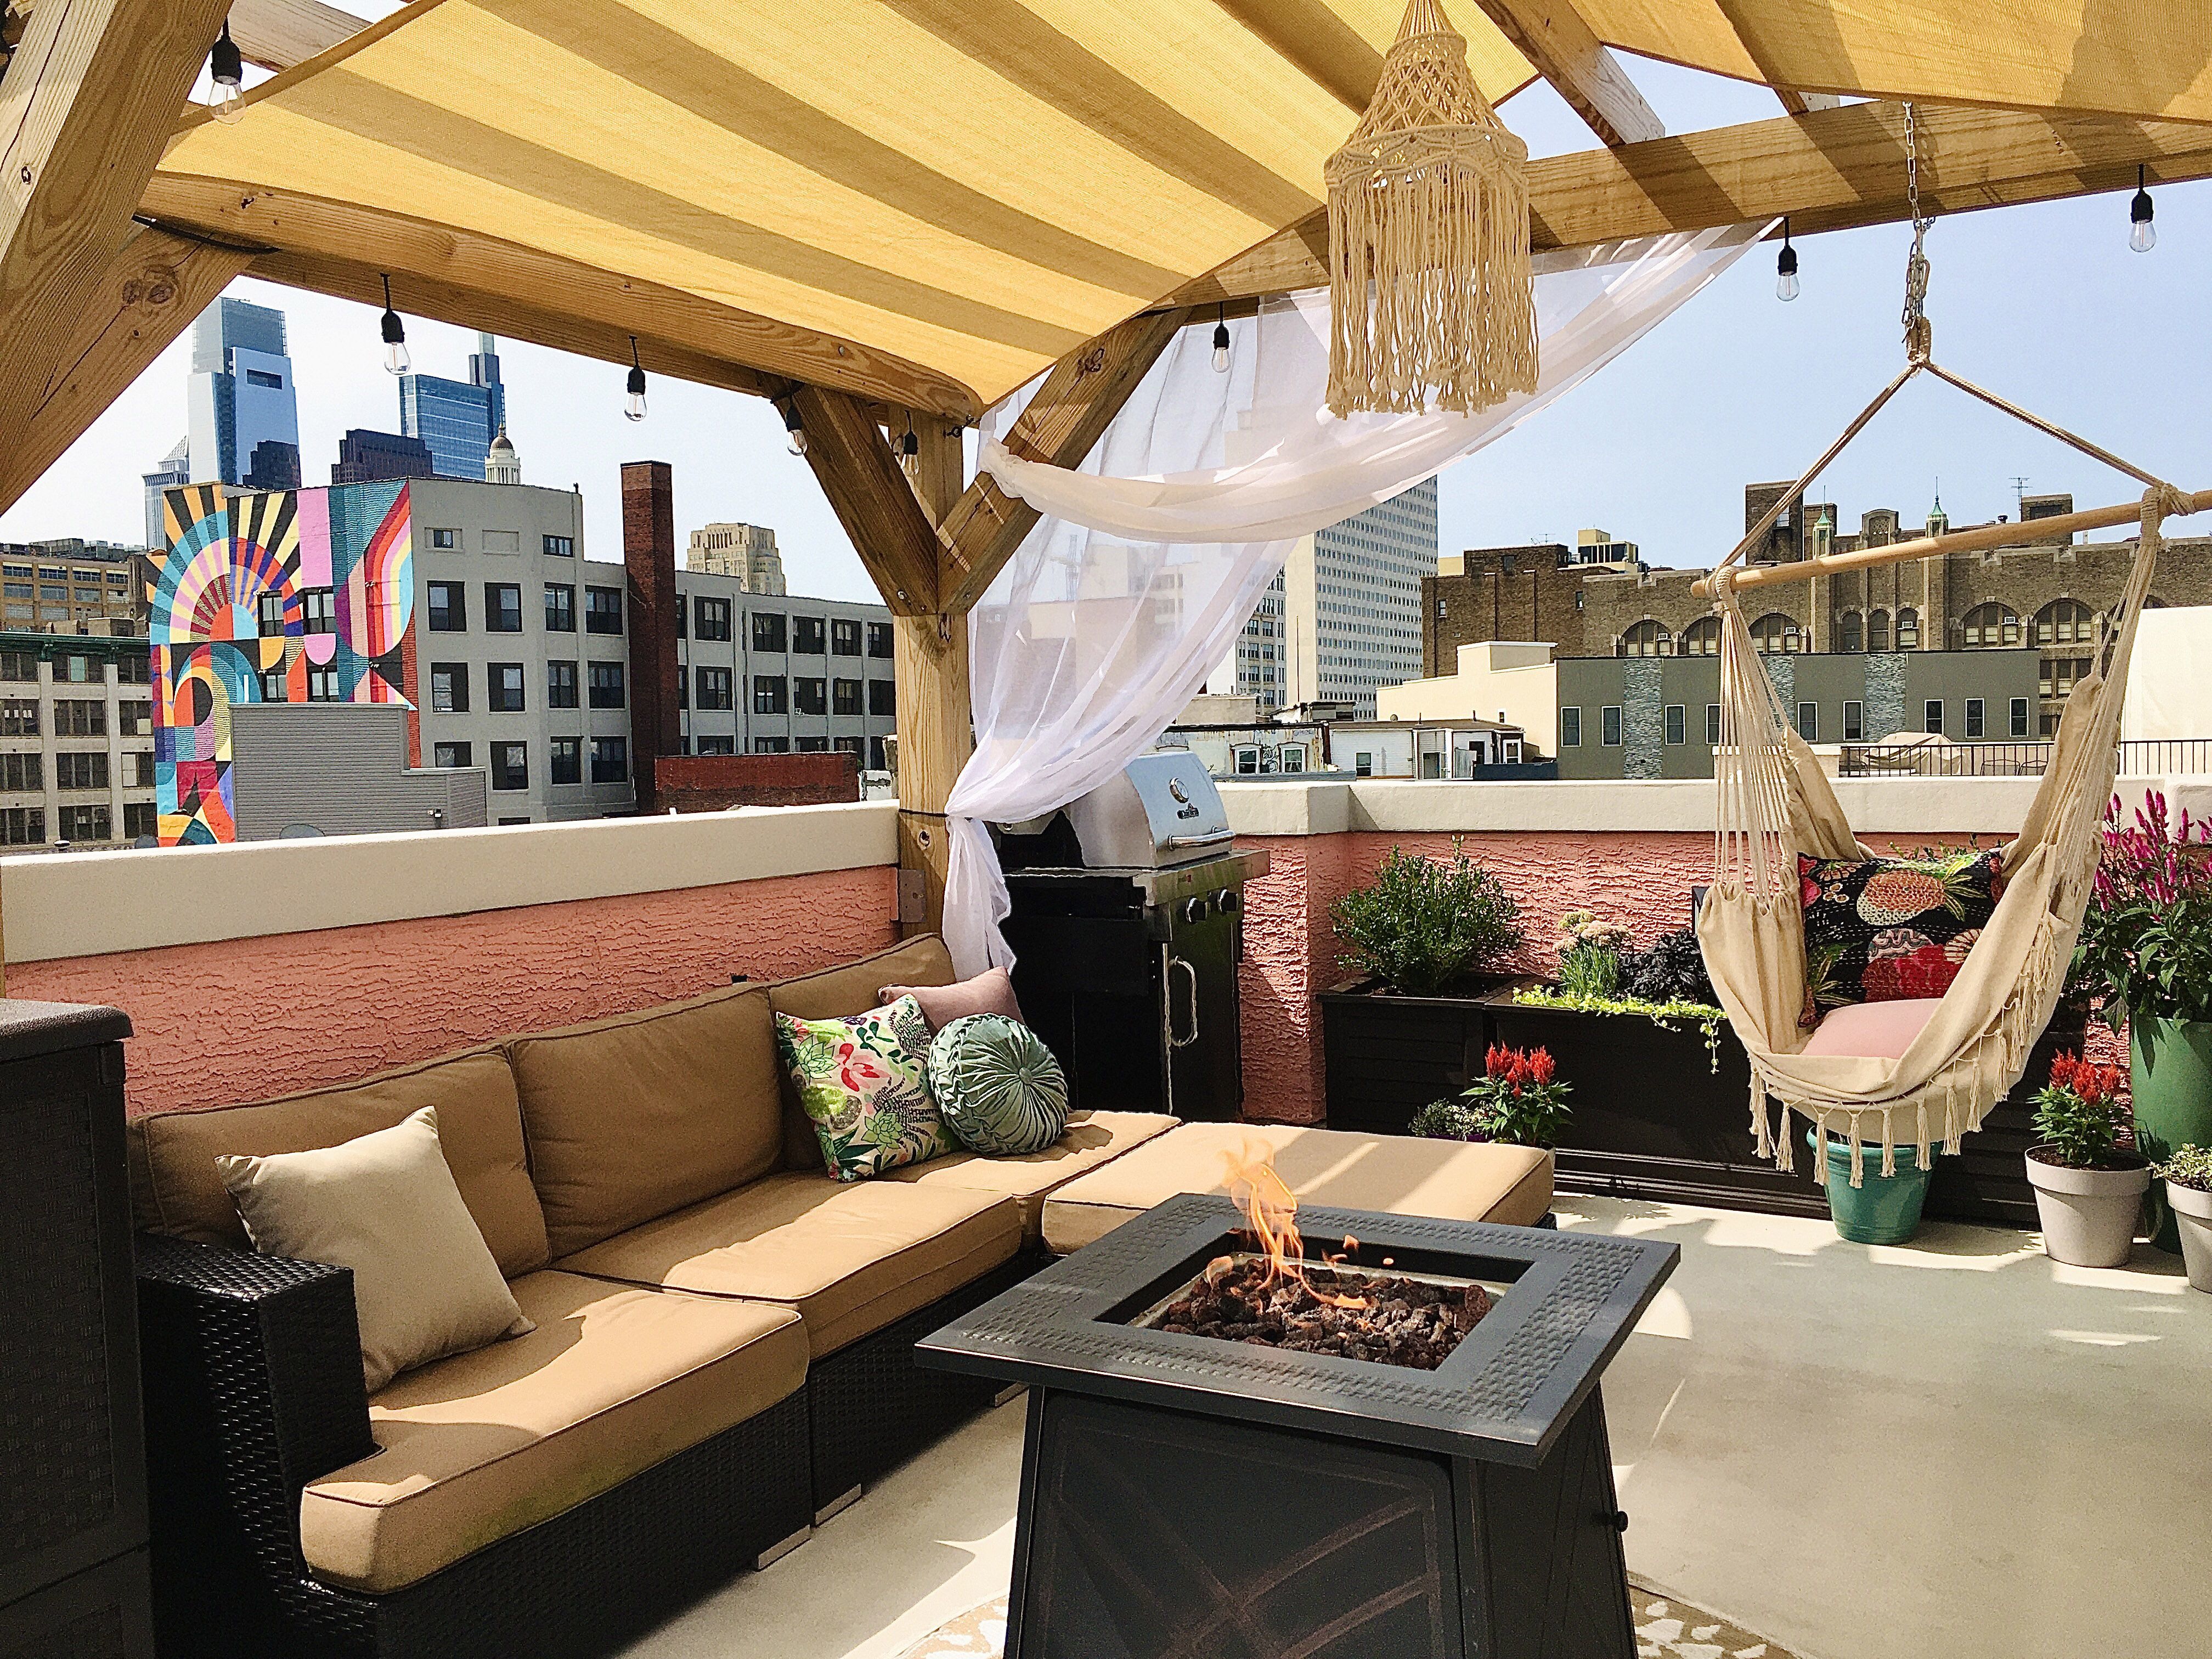 Roof decks are becoming a must-have in Philadelphia during the pandemic